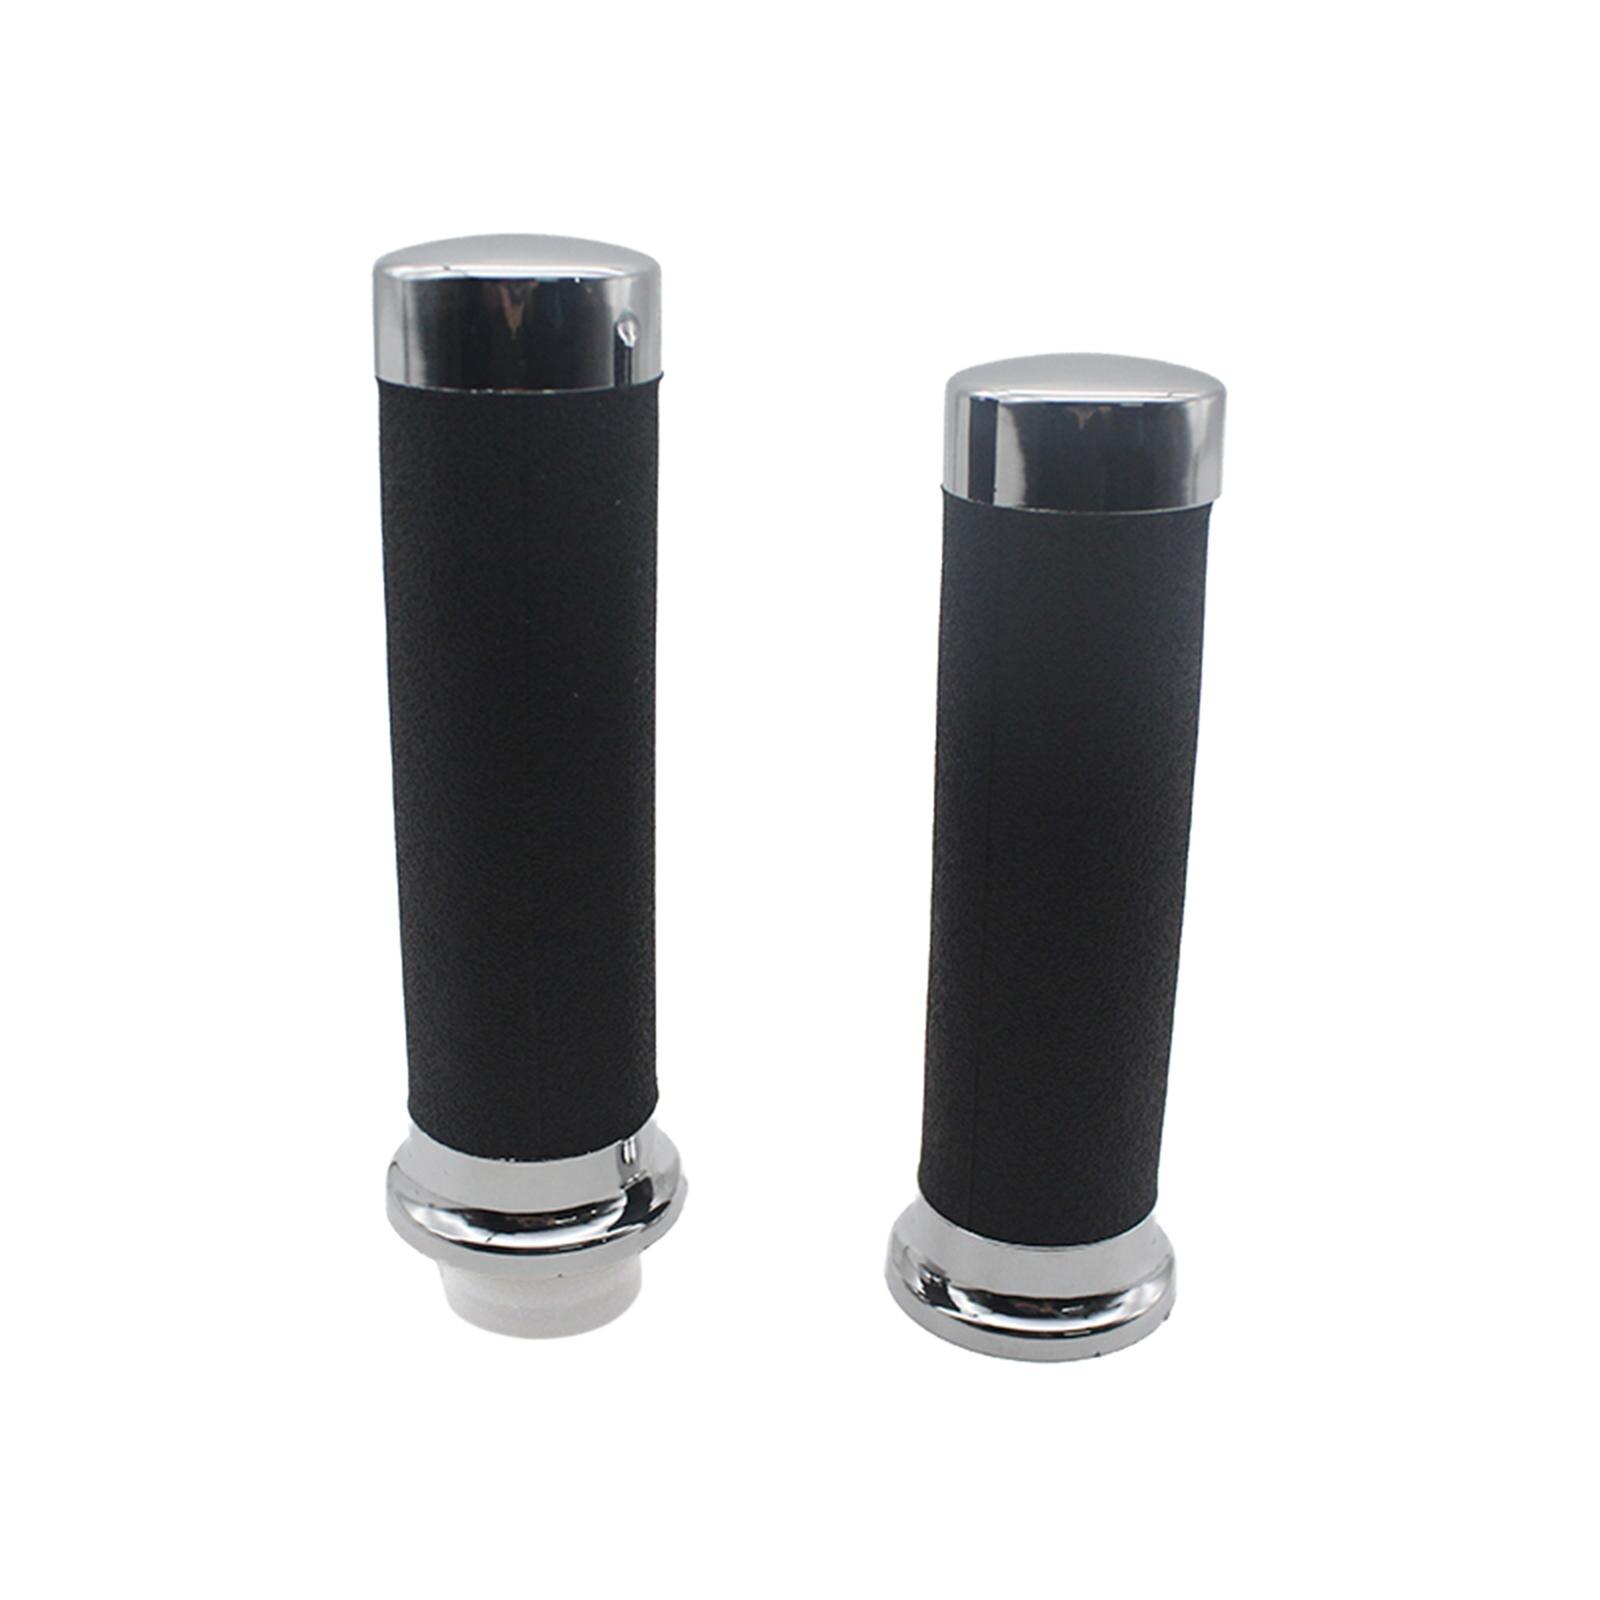 2 Pieces 28mm Motorcycle Handlebar Grips Handle Grips for Honda Magna 250 Magne250 Shadow 400 750 Replacement Durable